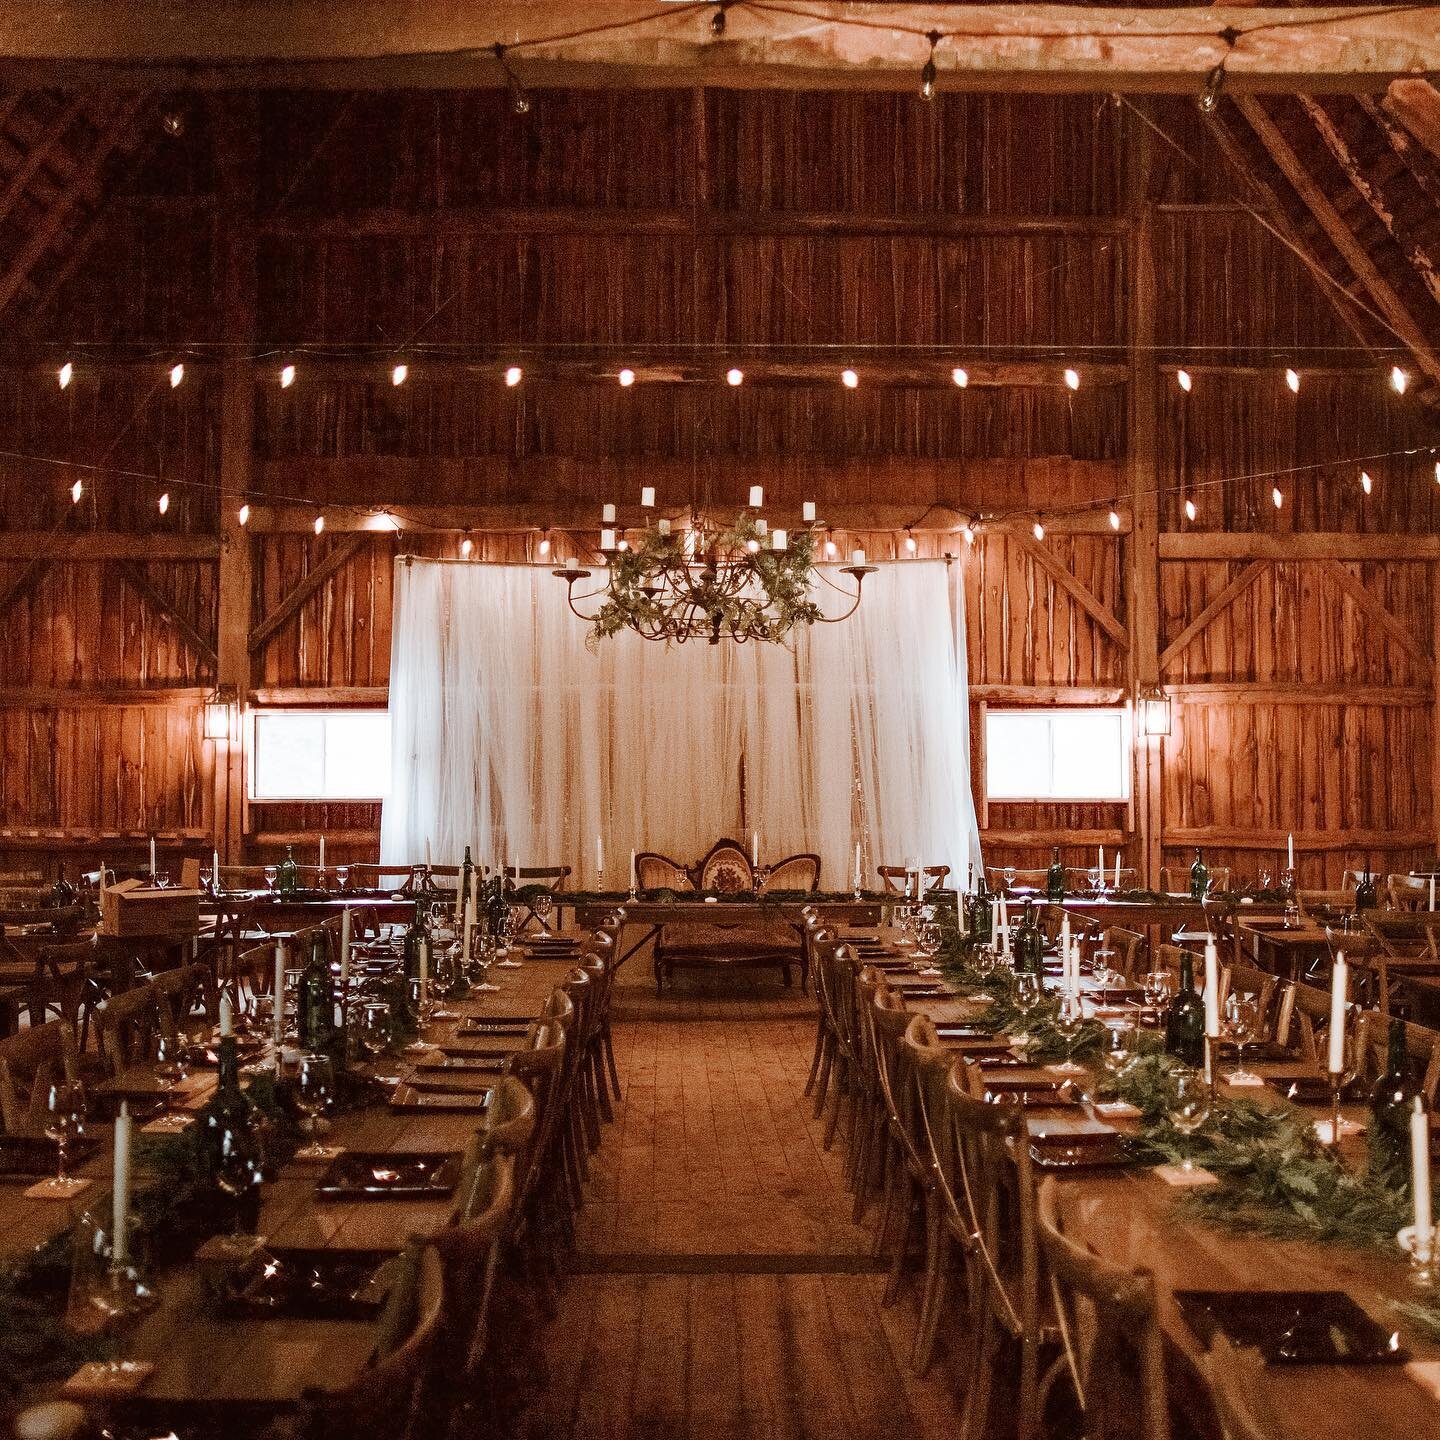 The Big Barn, all dressed up and ready to make some memories.

Photography by @honeypressphoto